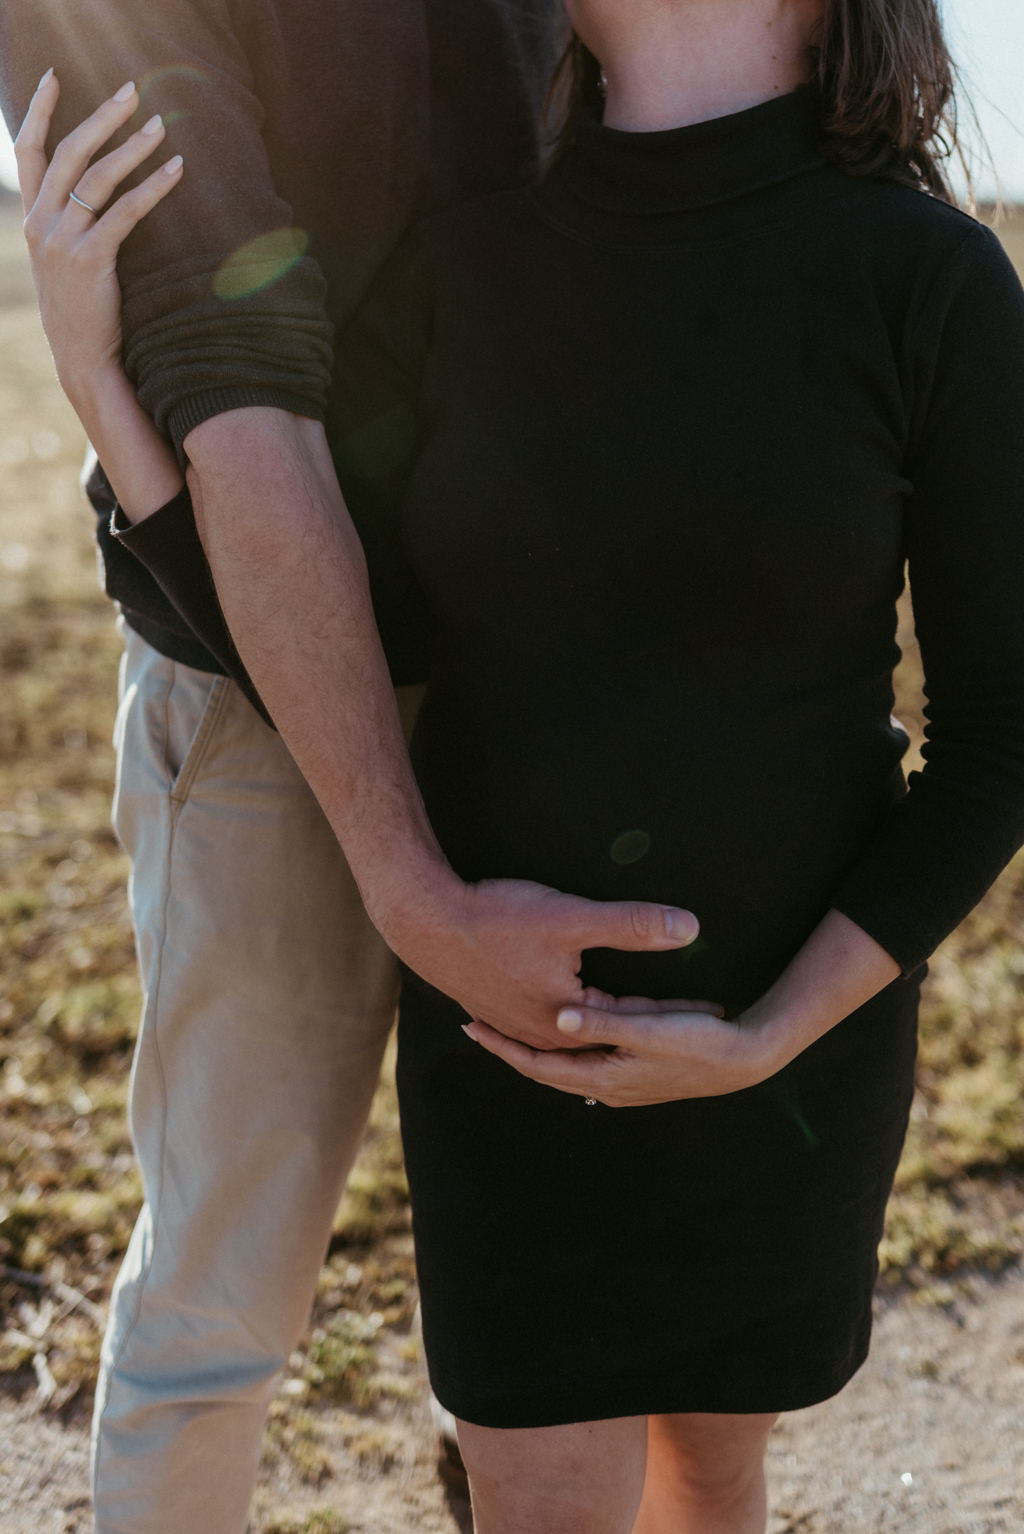 Man holding pregnant woman's belly